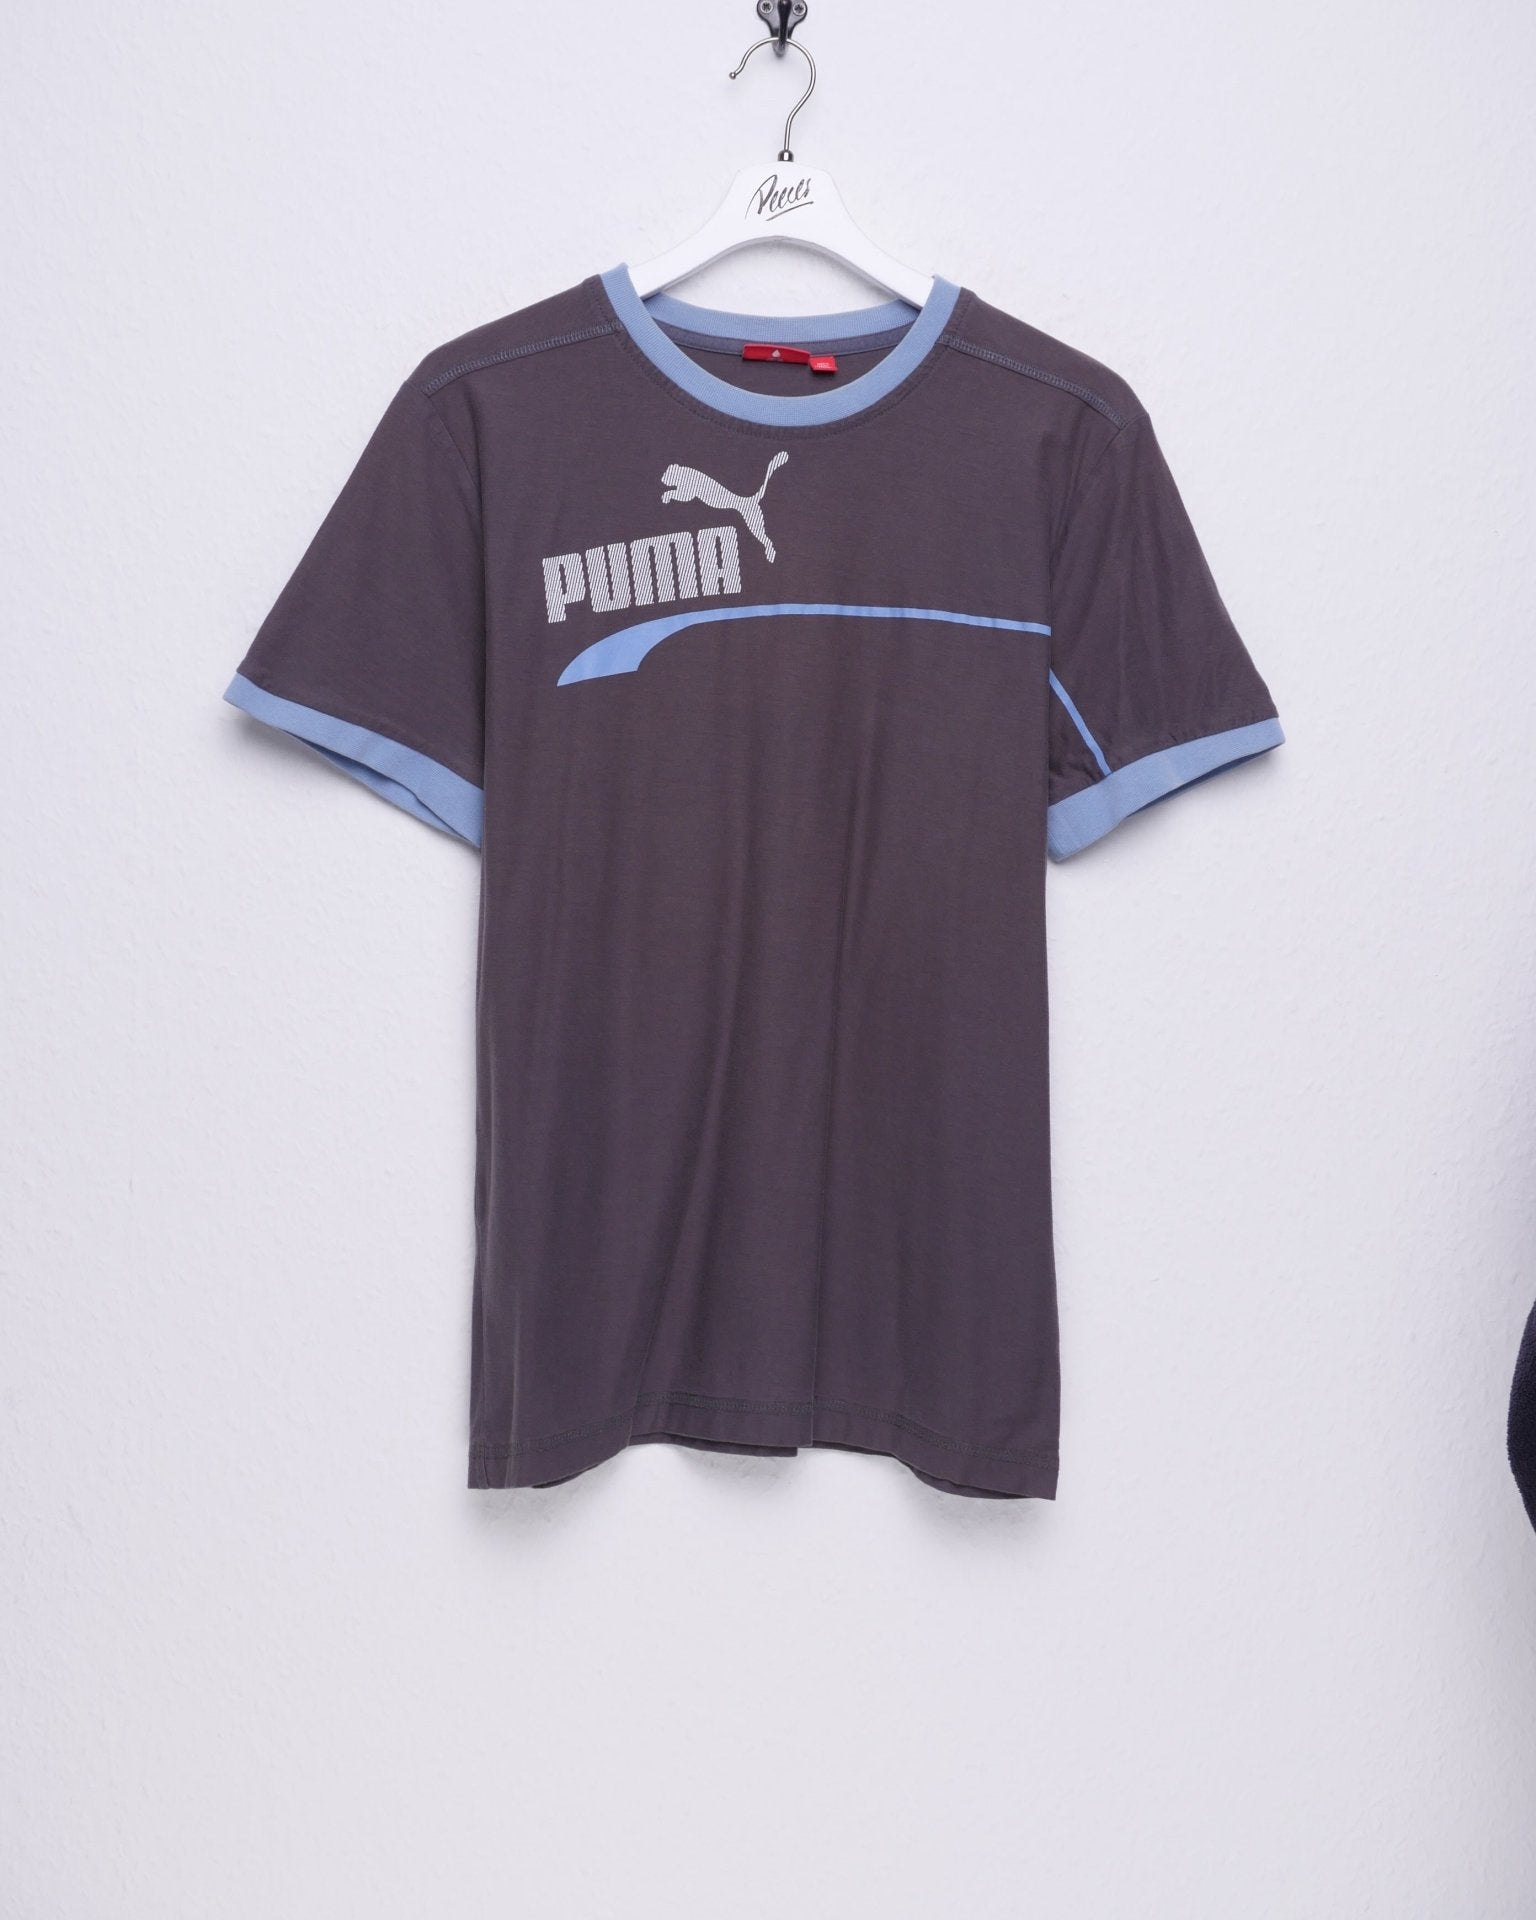 puma printed Spellout two toned Shirt - Peeces